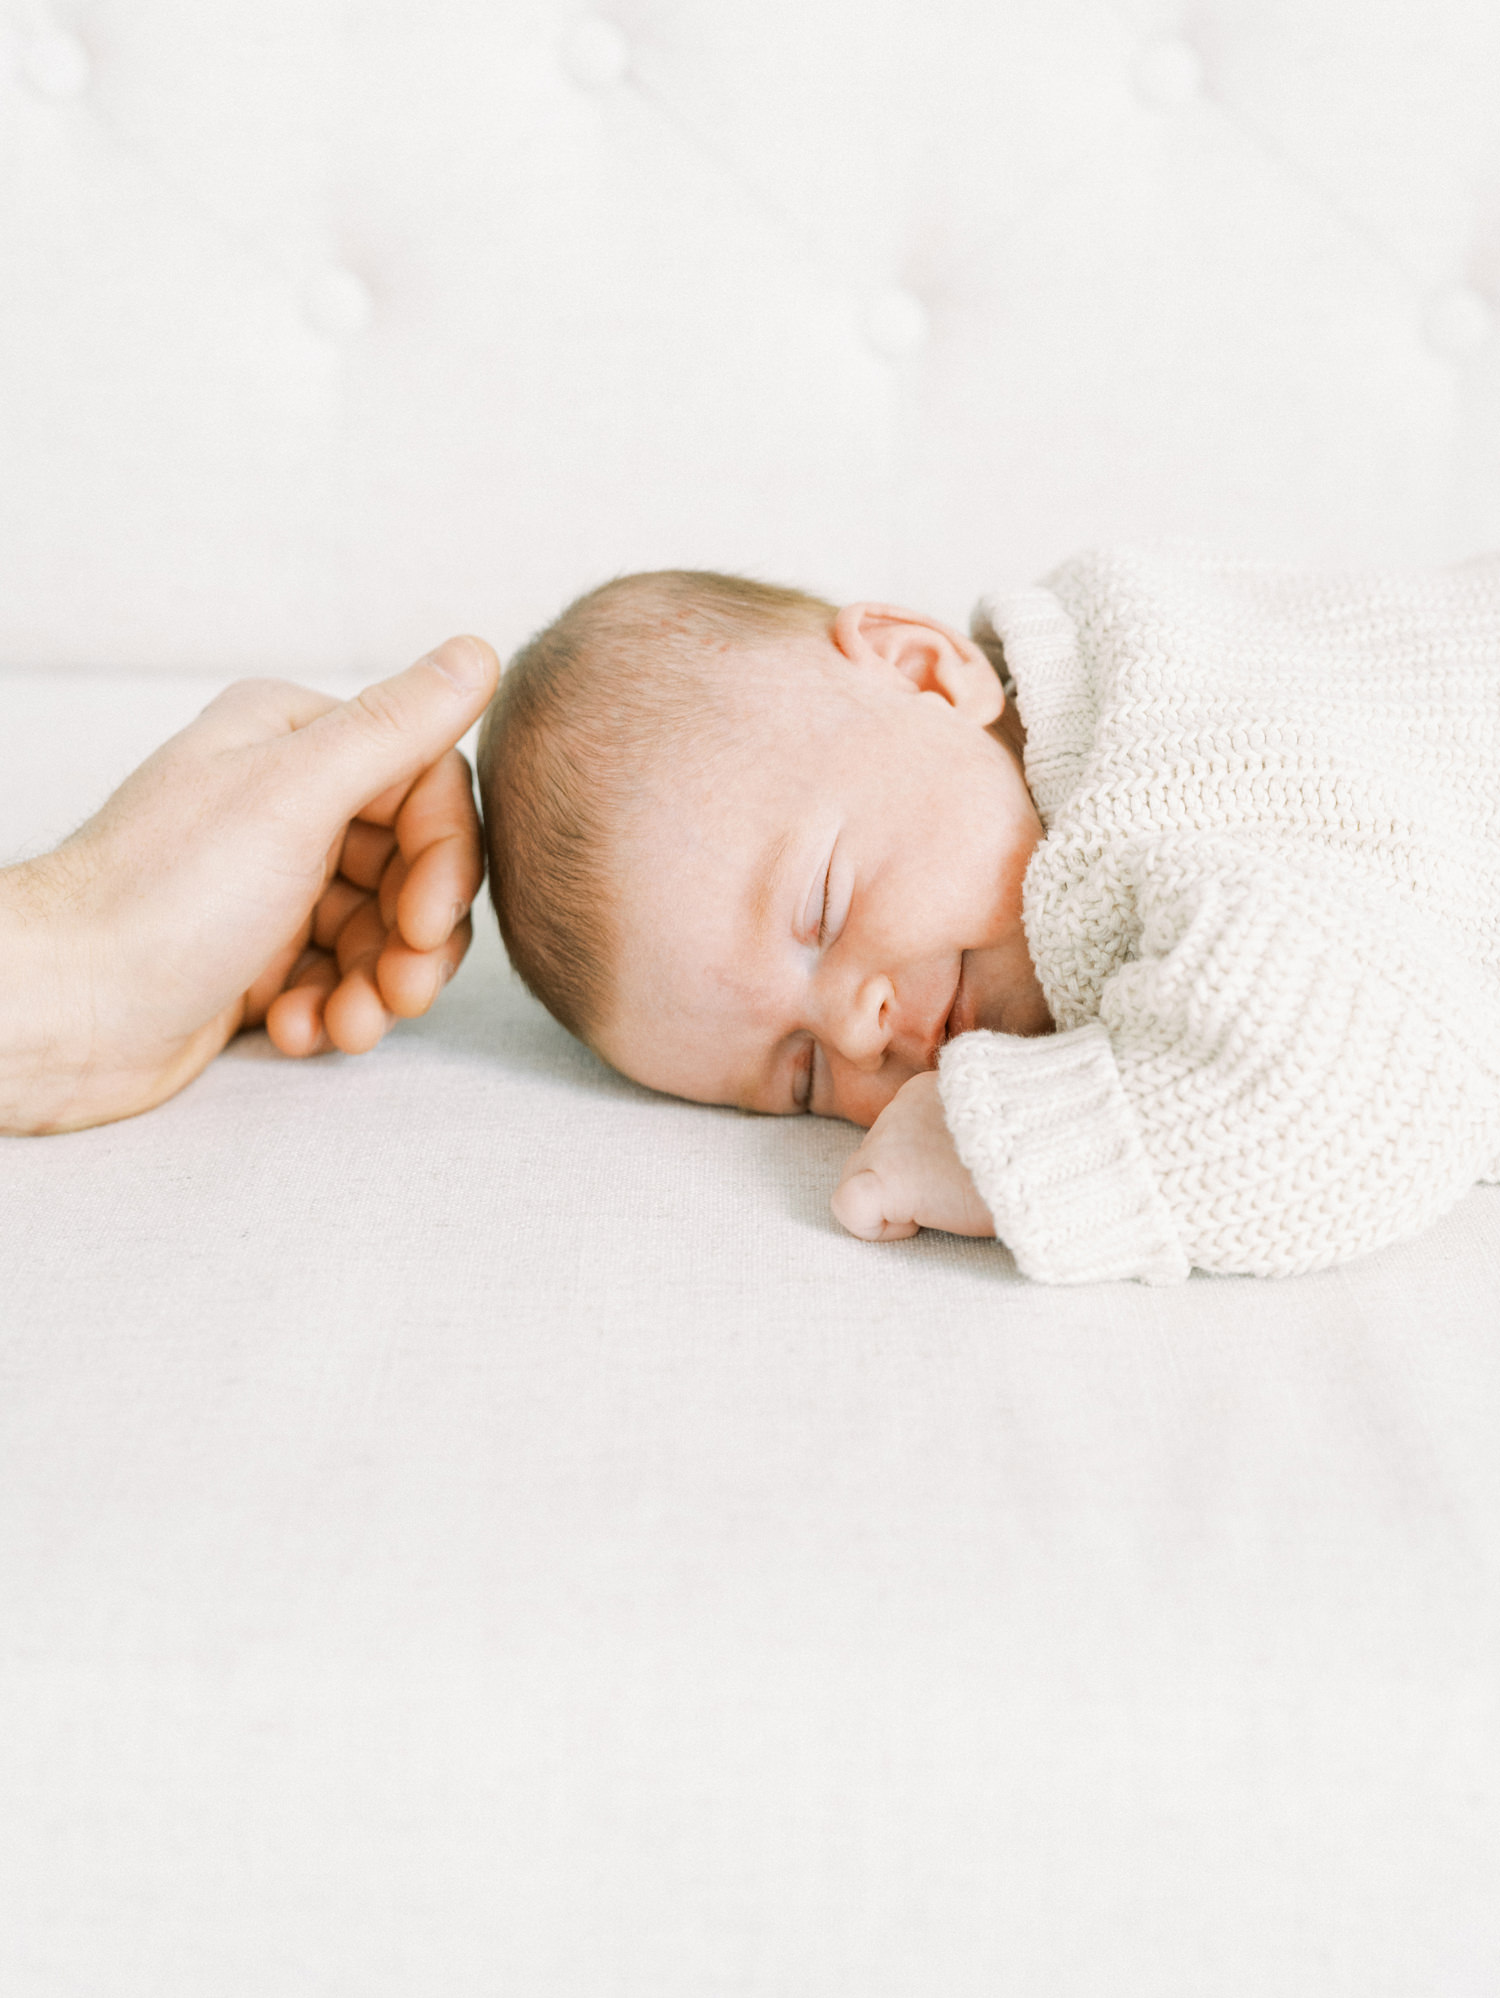 sleeping newborn on white couch wearing white sweater smiling as father strokes their head